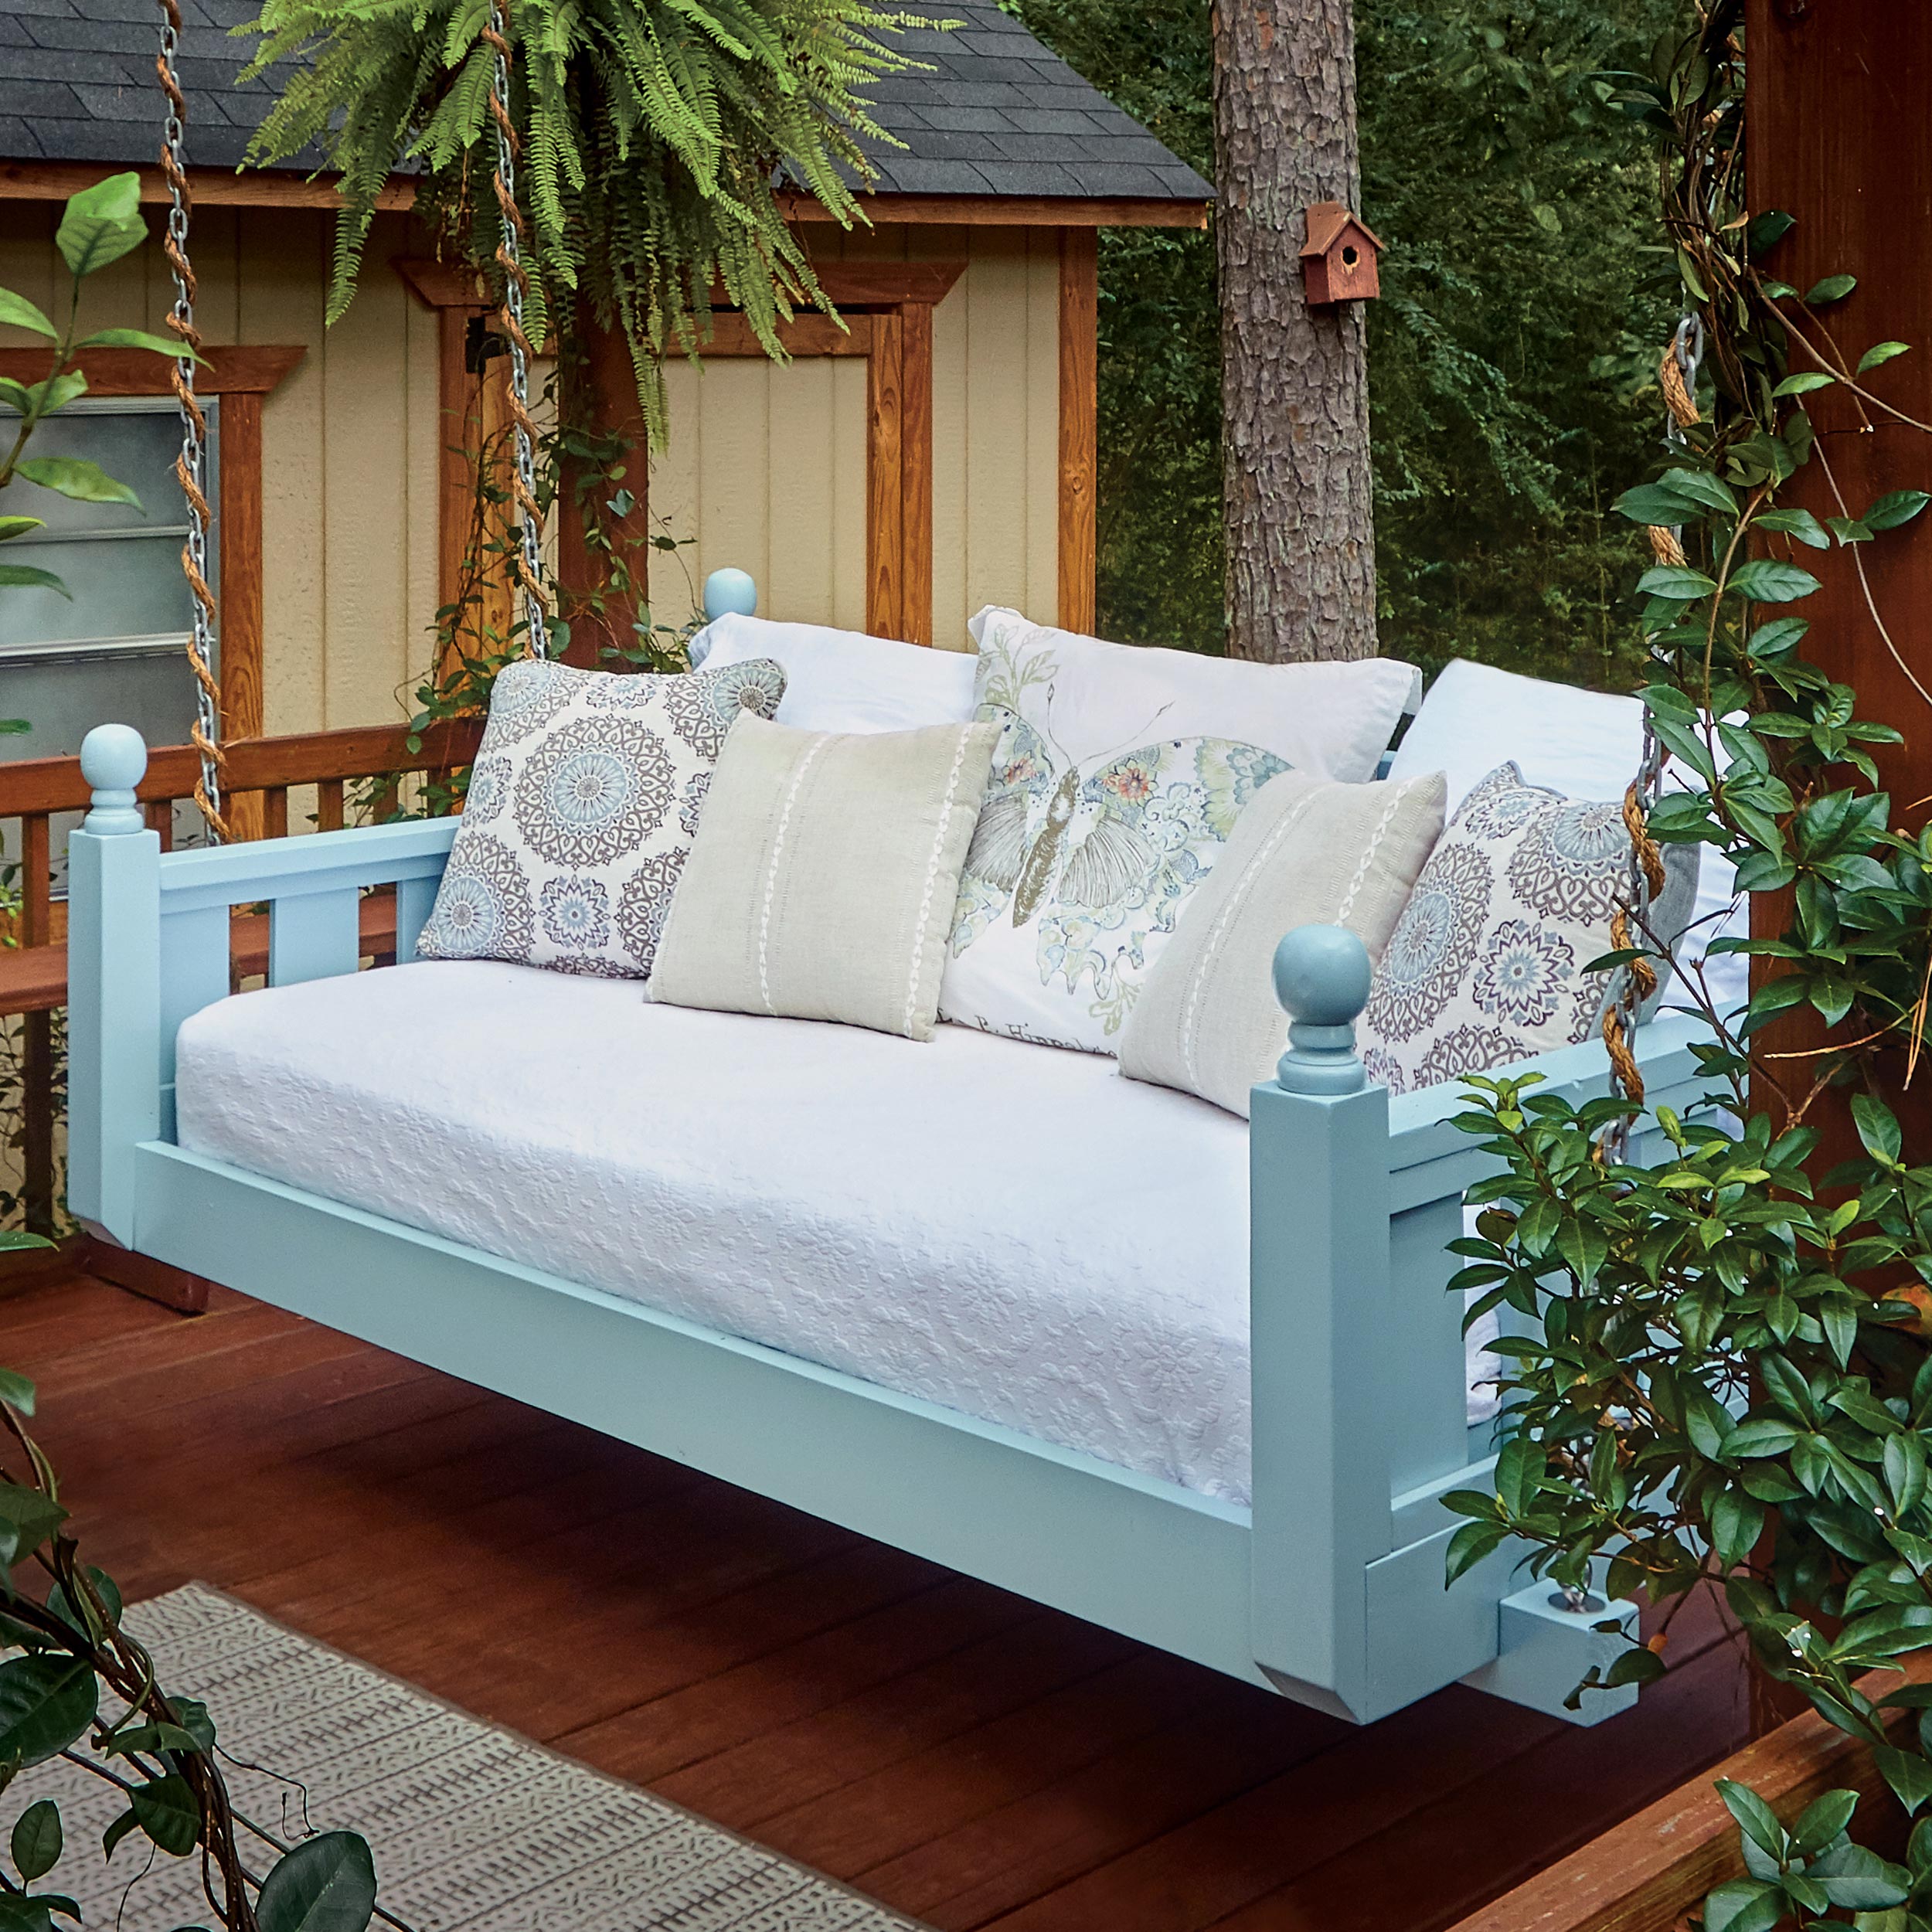 Build A Swing Bed Downloadable Plan